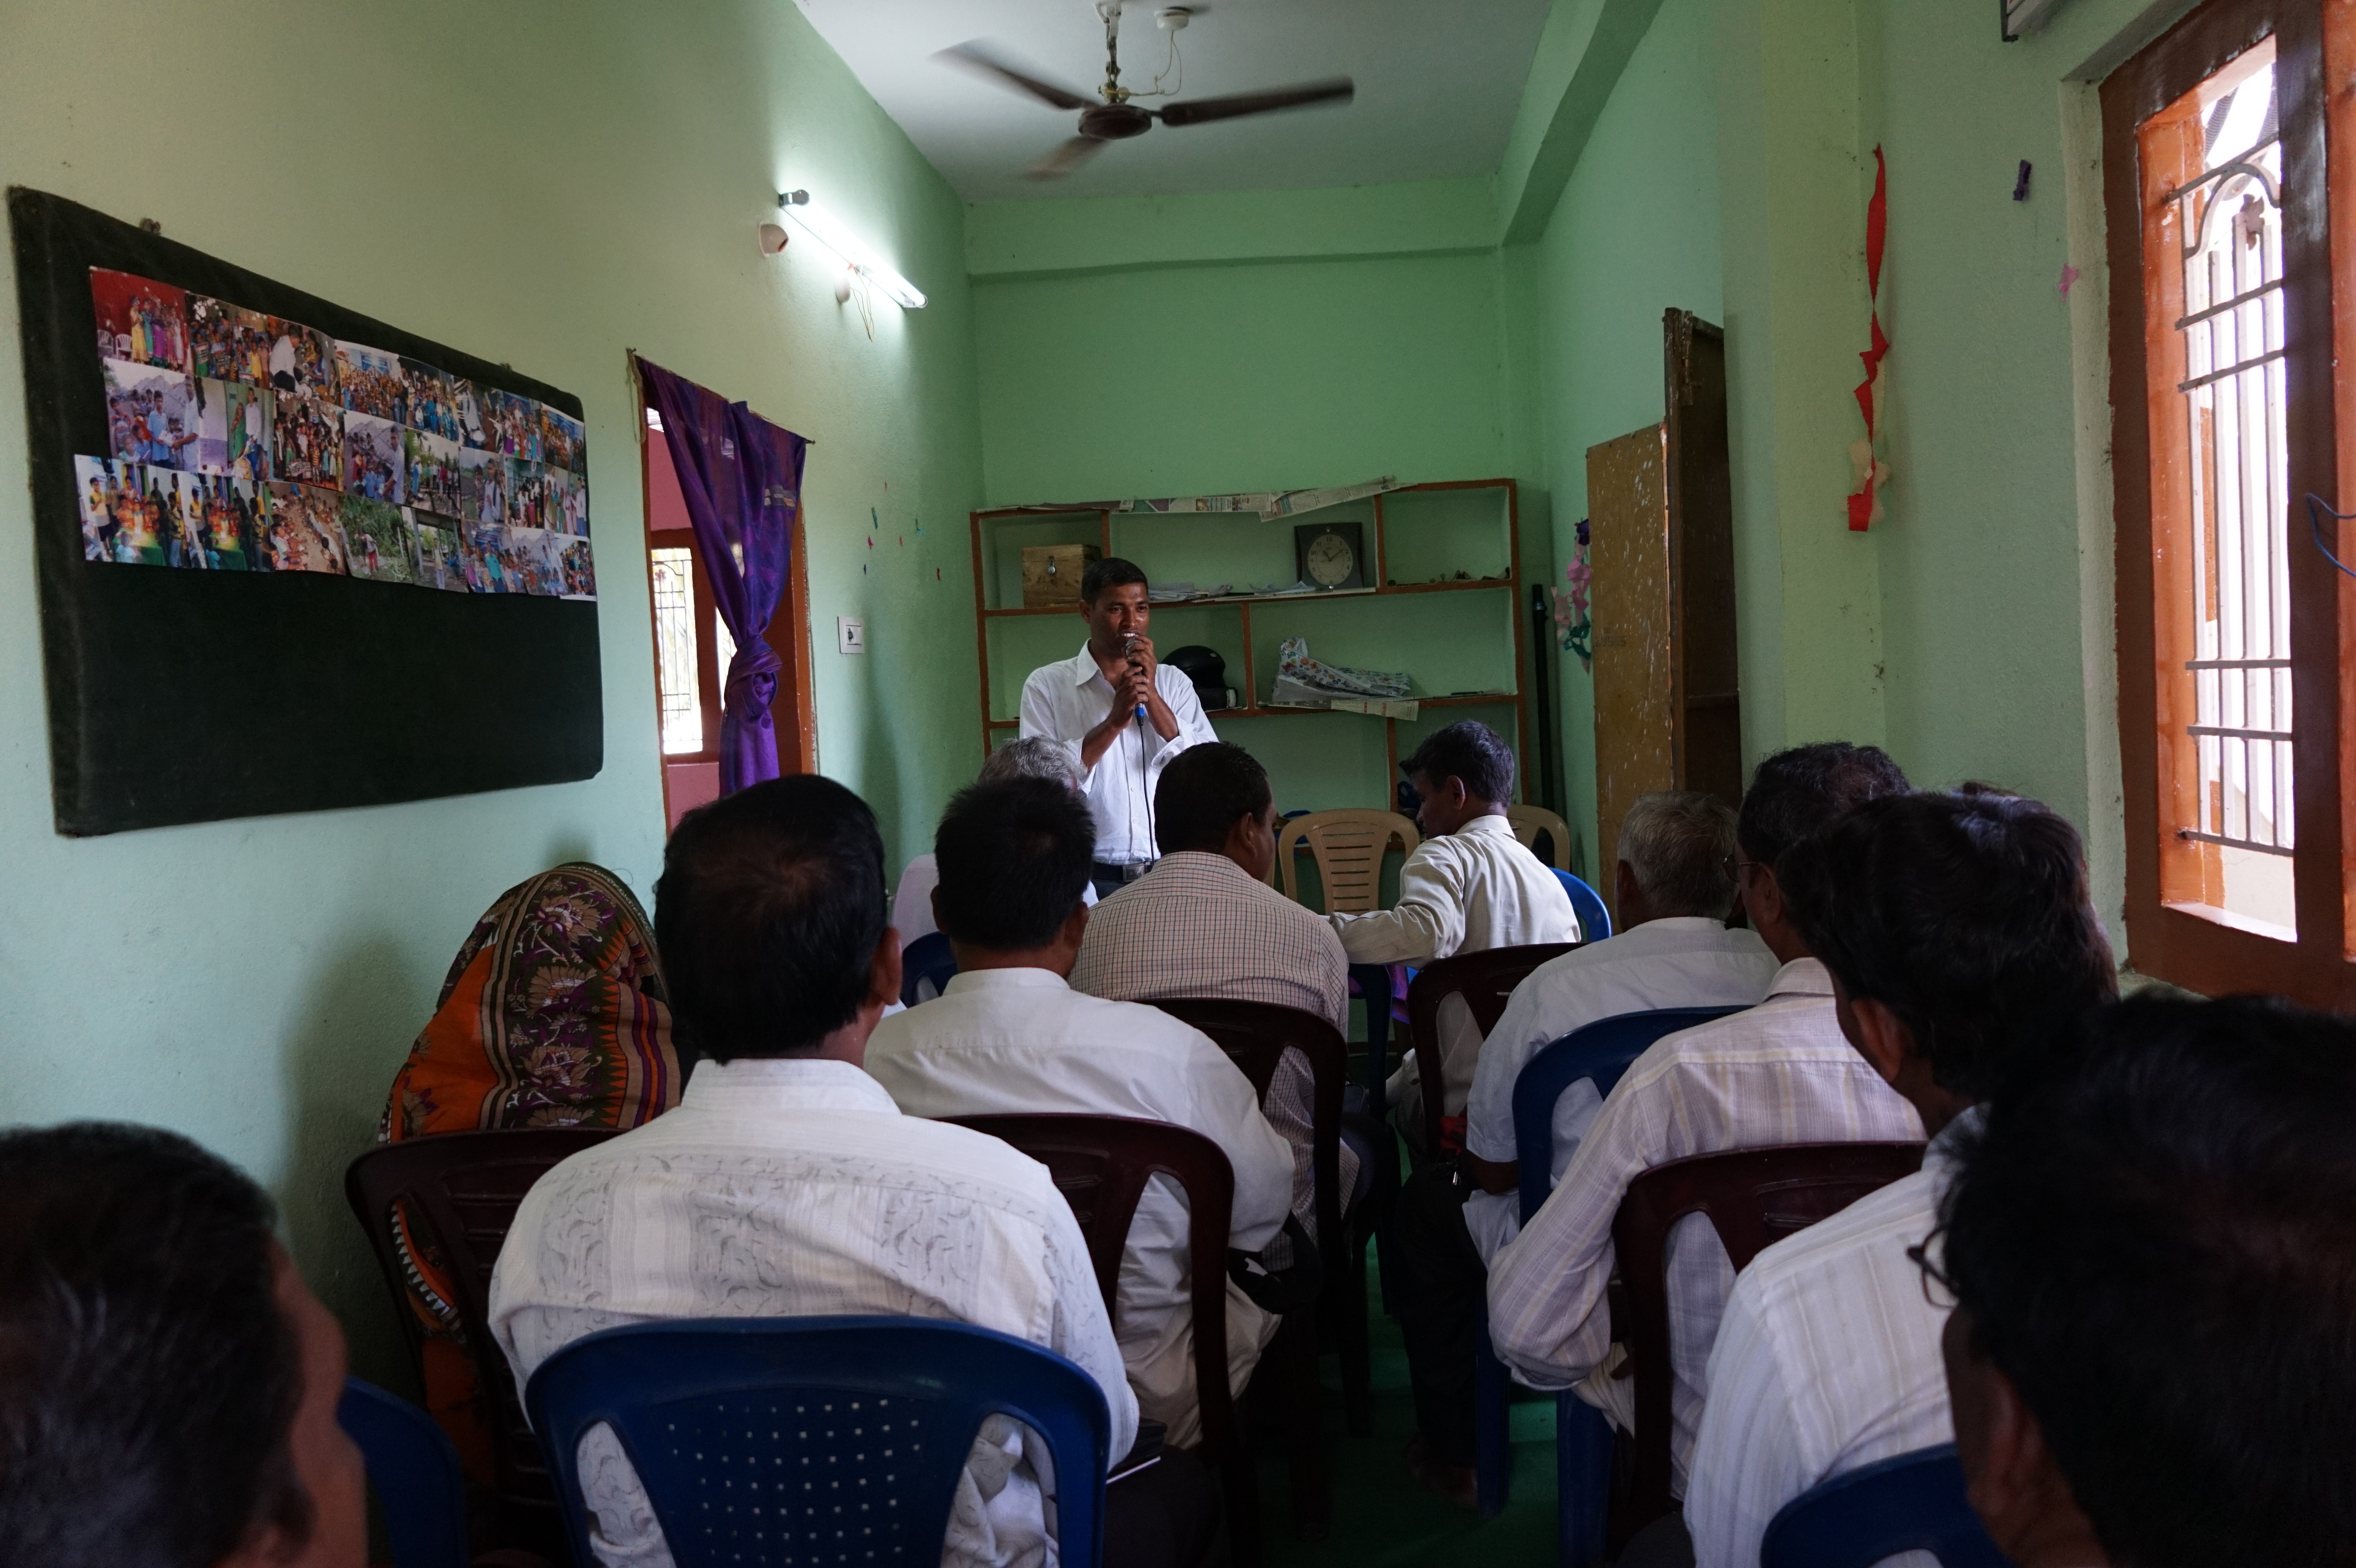 New Generation of Pastors Trained in Spreading the Good News – Nandiwada, India